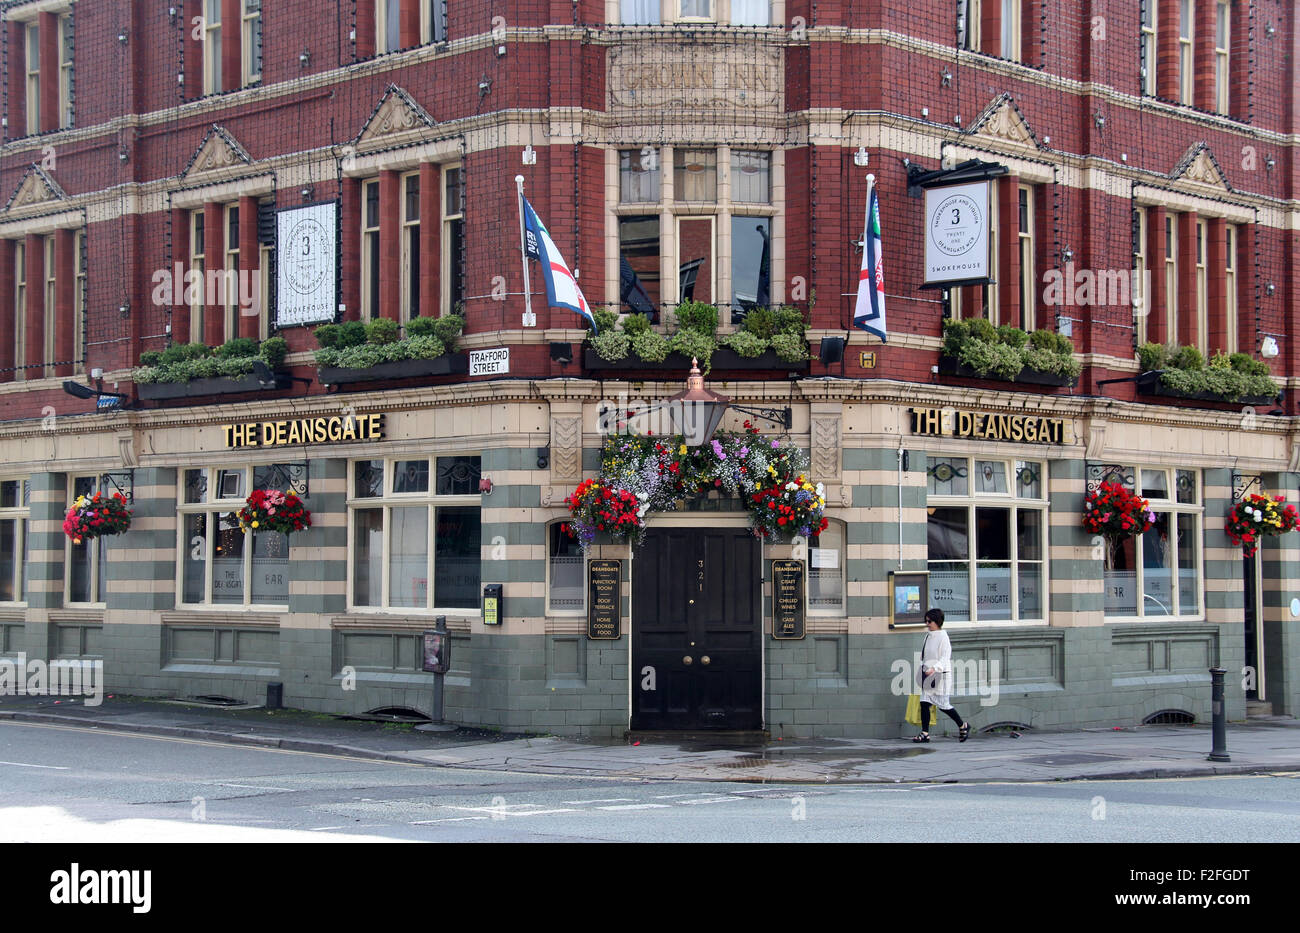 The Deansgate Pub in Manchester Stock Photo: 87623364 - Alamy